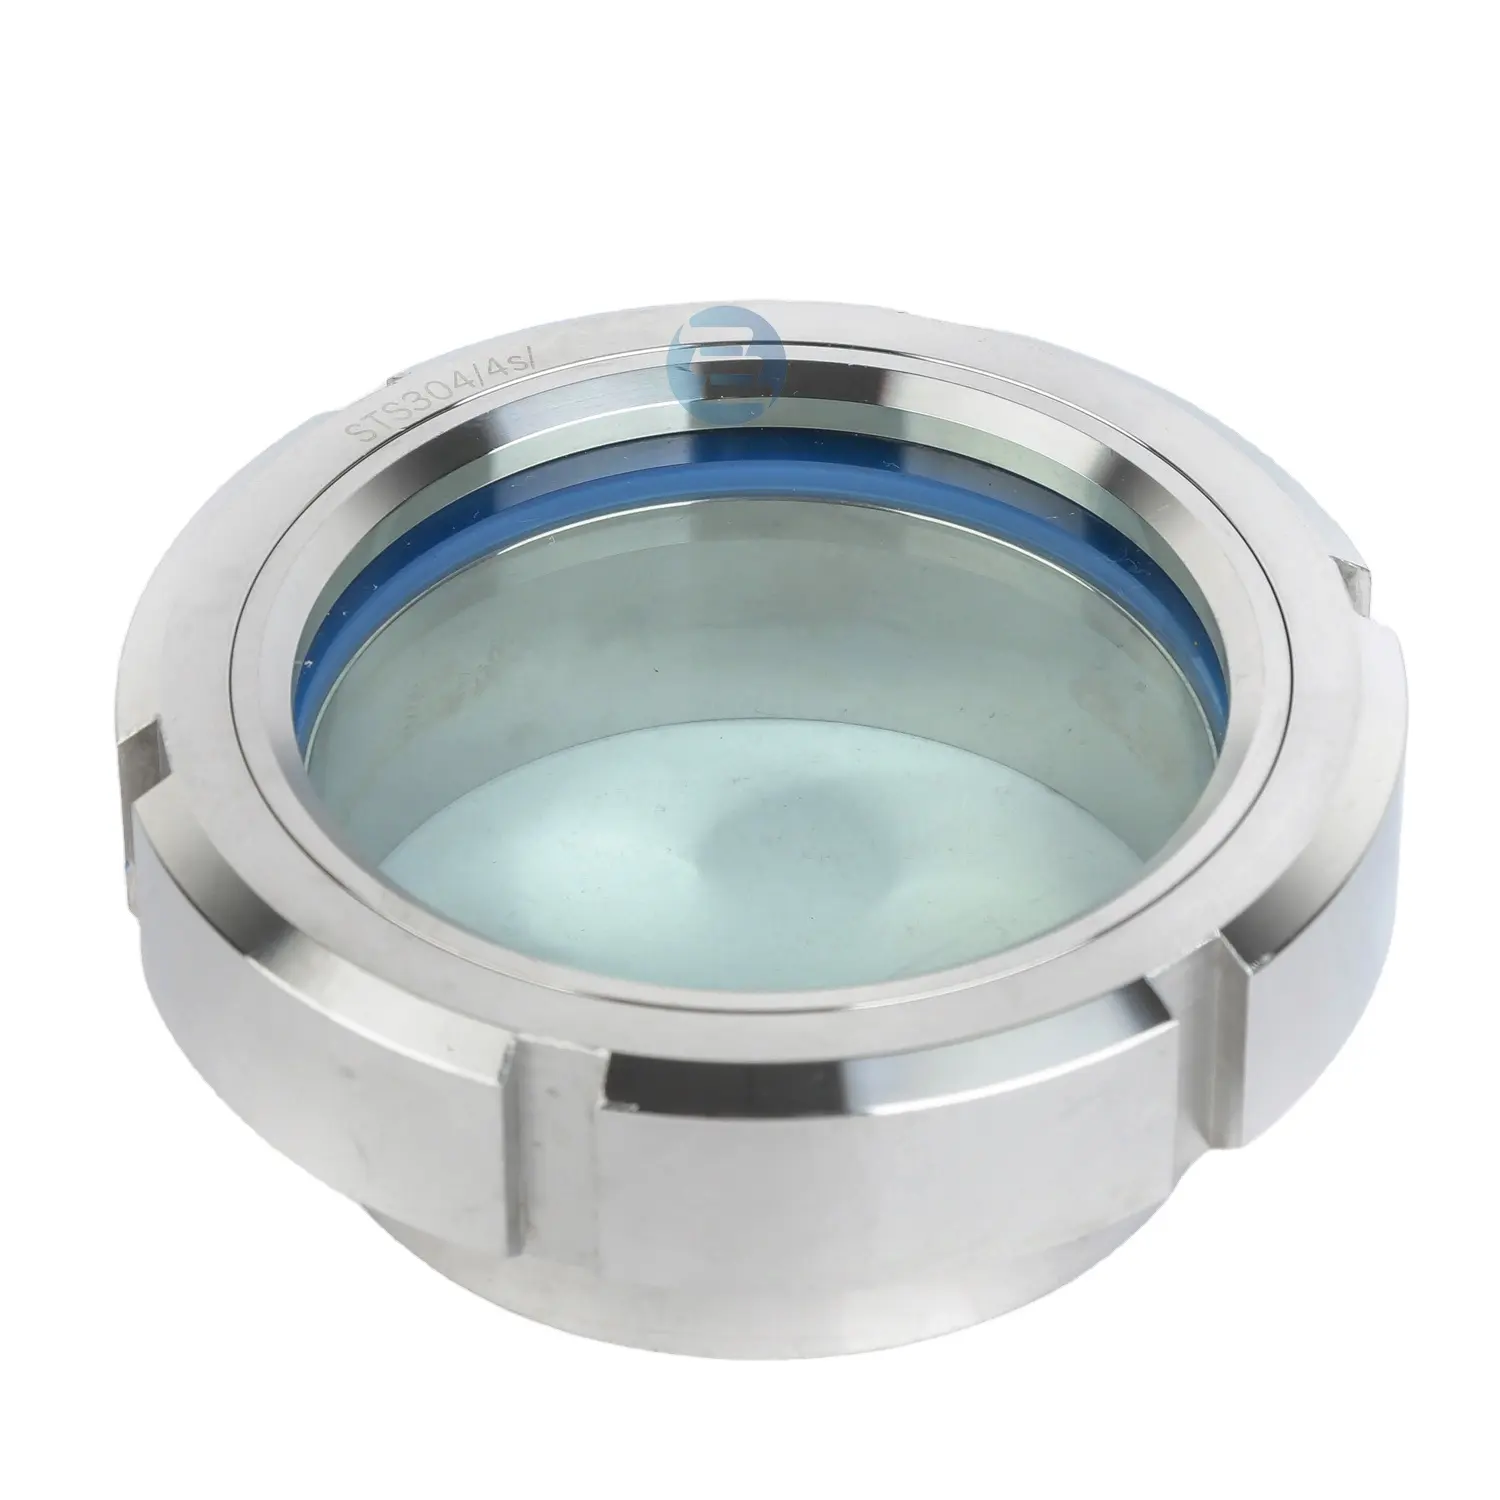 Santhai DIN INCH Union type Round Sight Glass For Food Grade Industrial